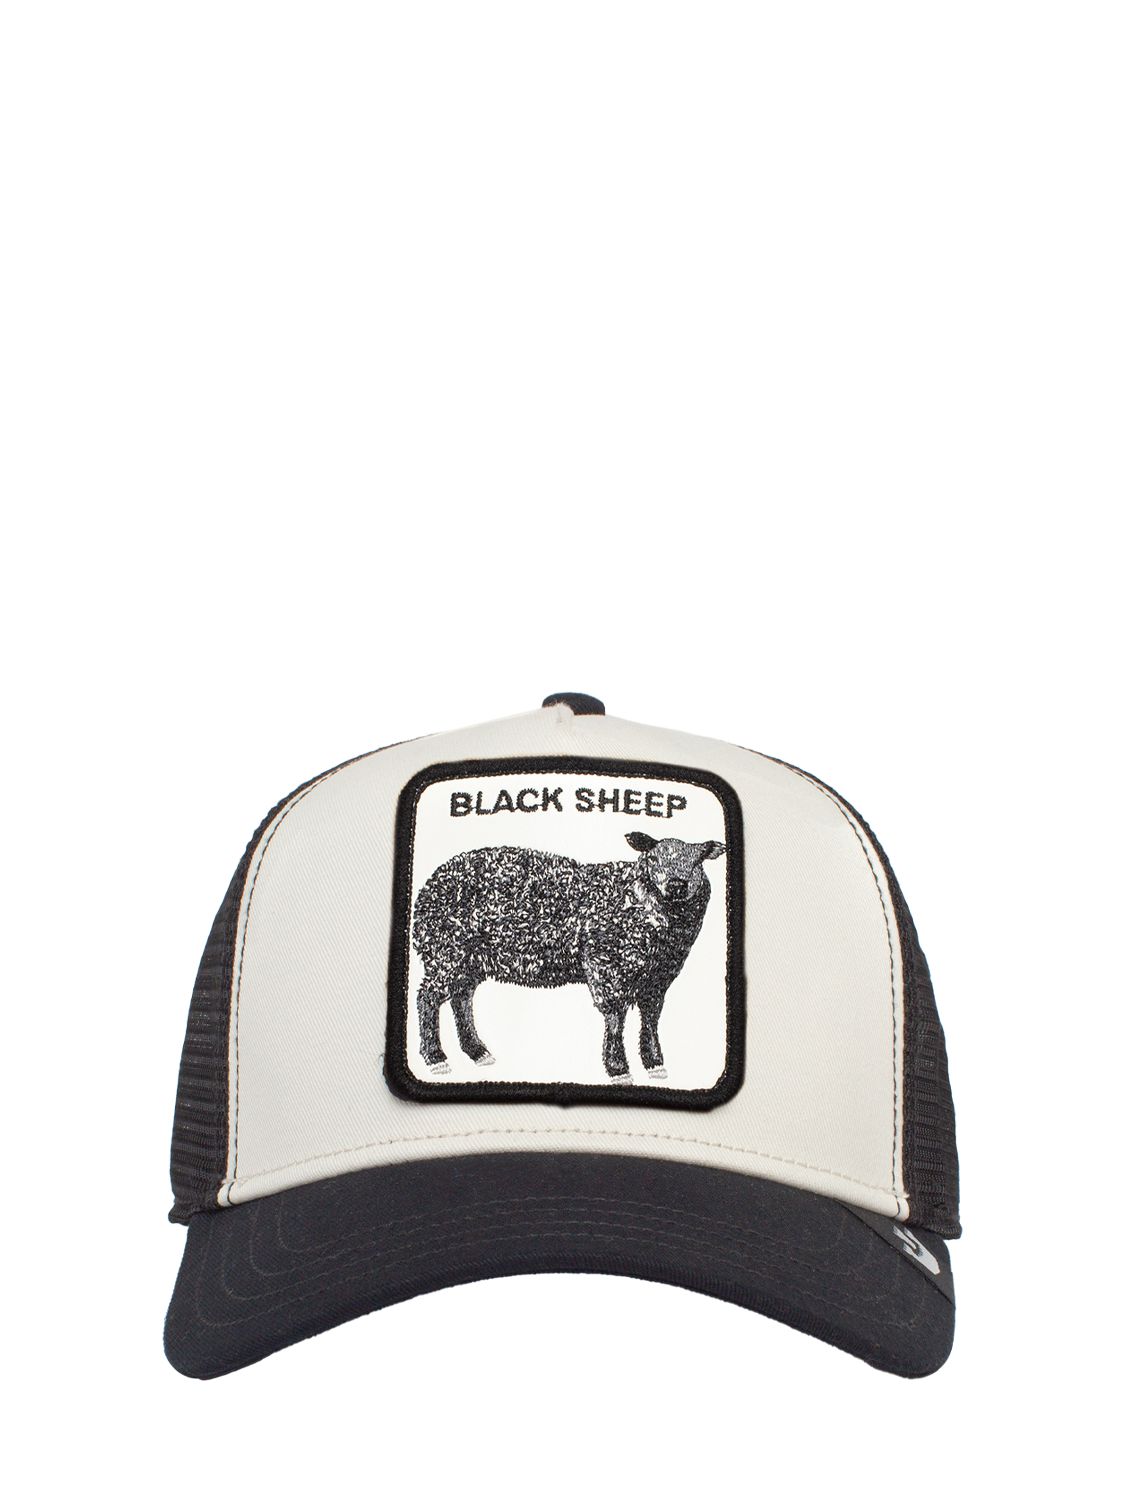 The Black Sheep Trucker Hat W/patch